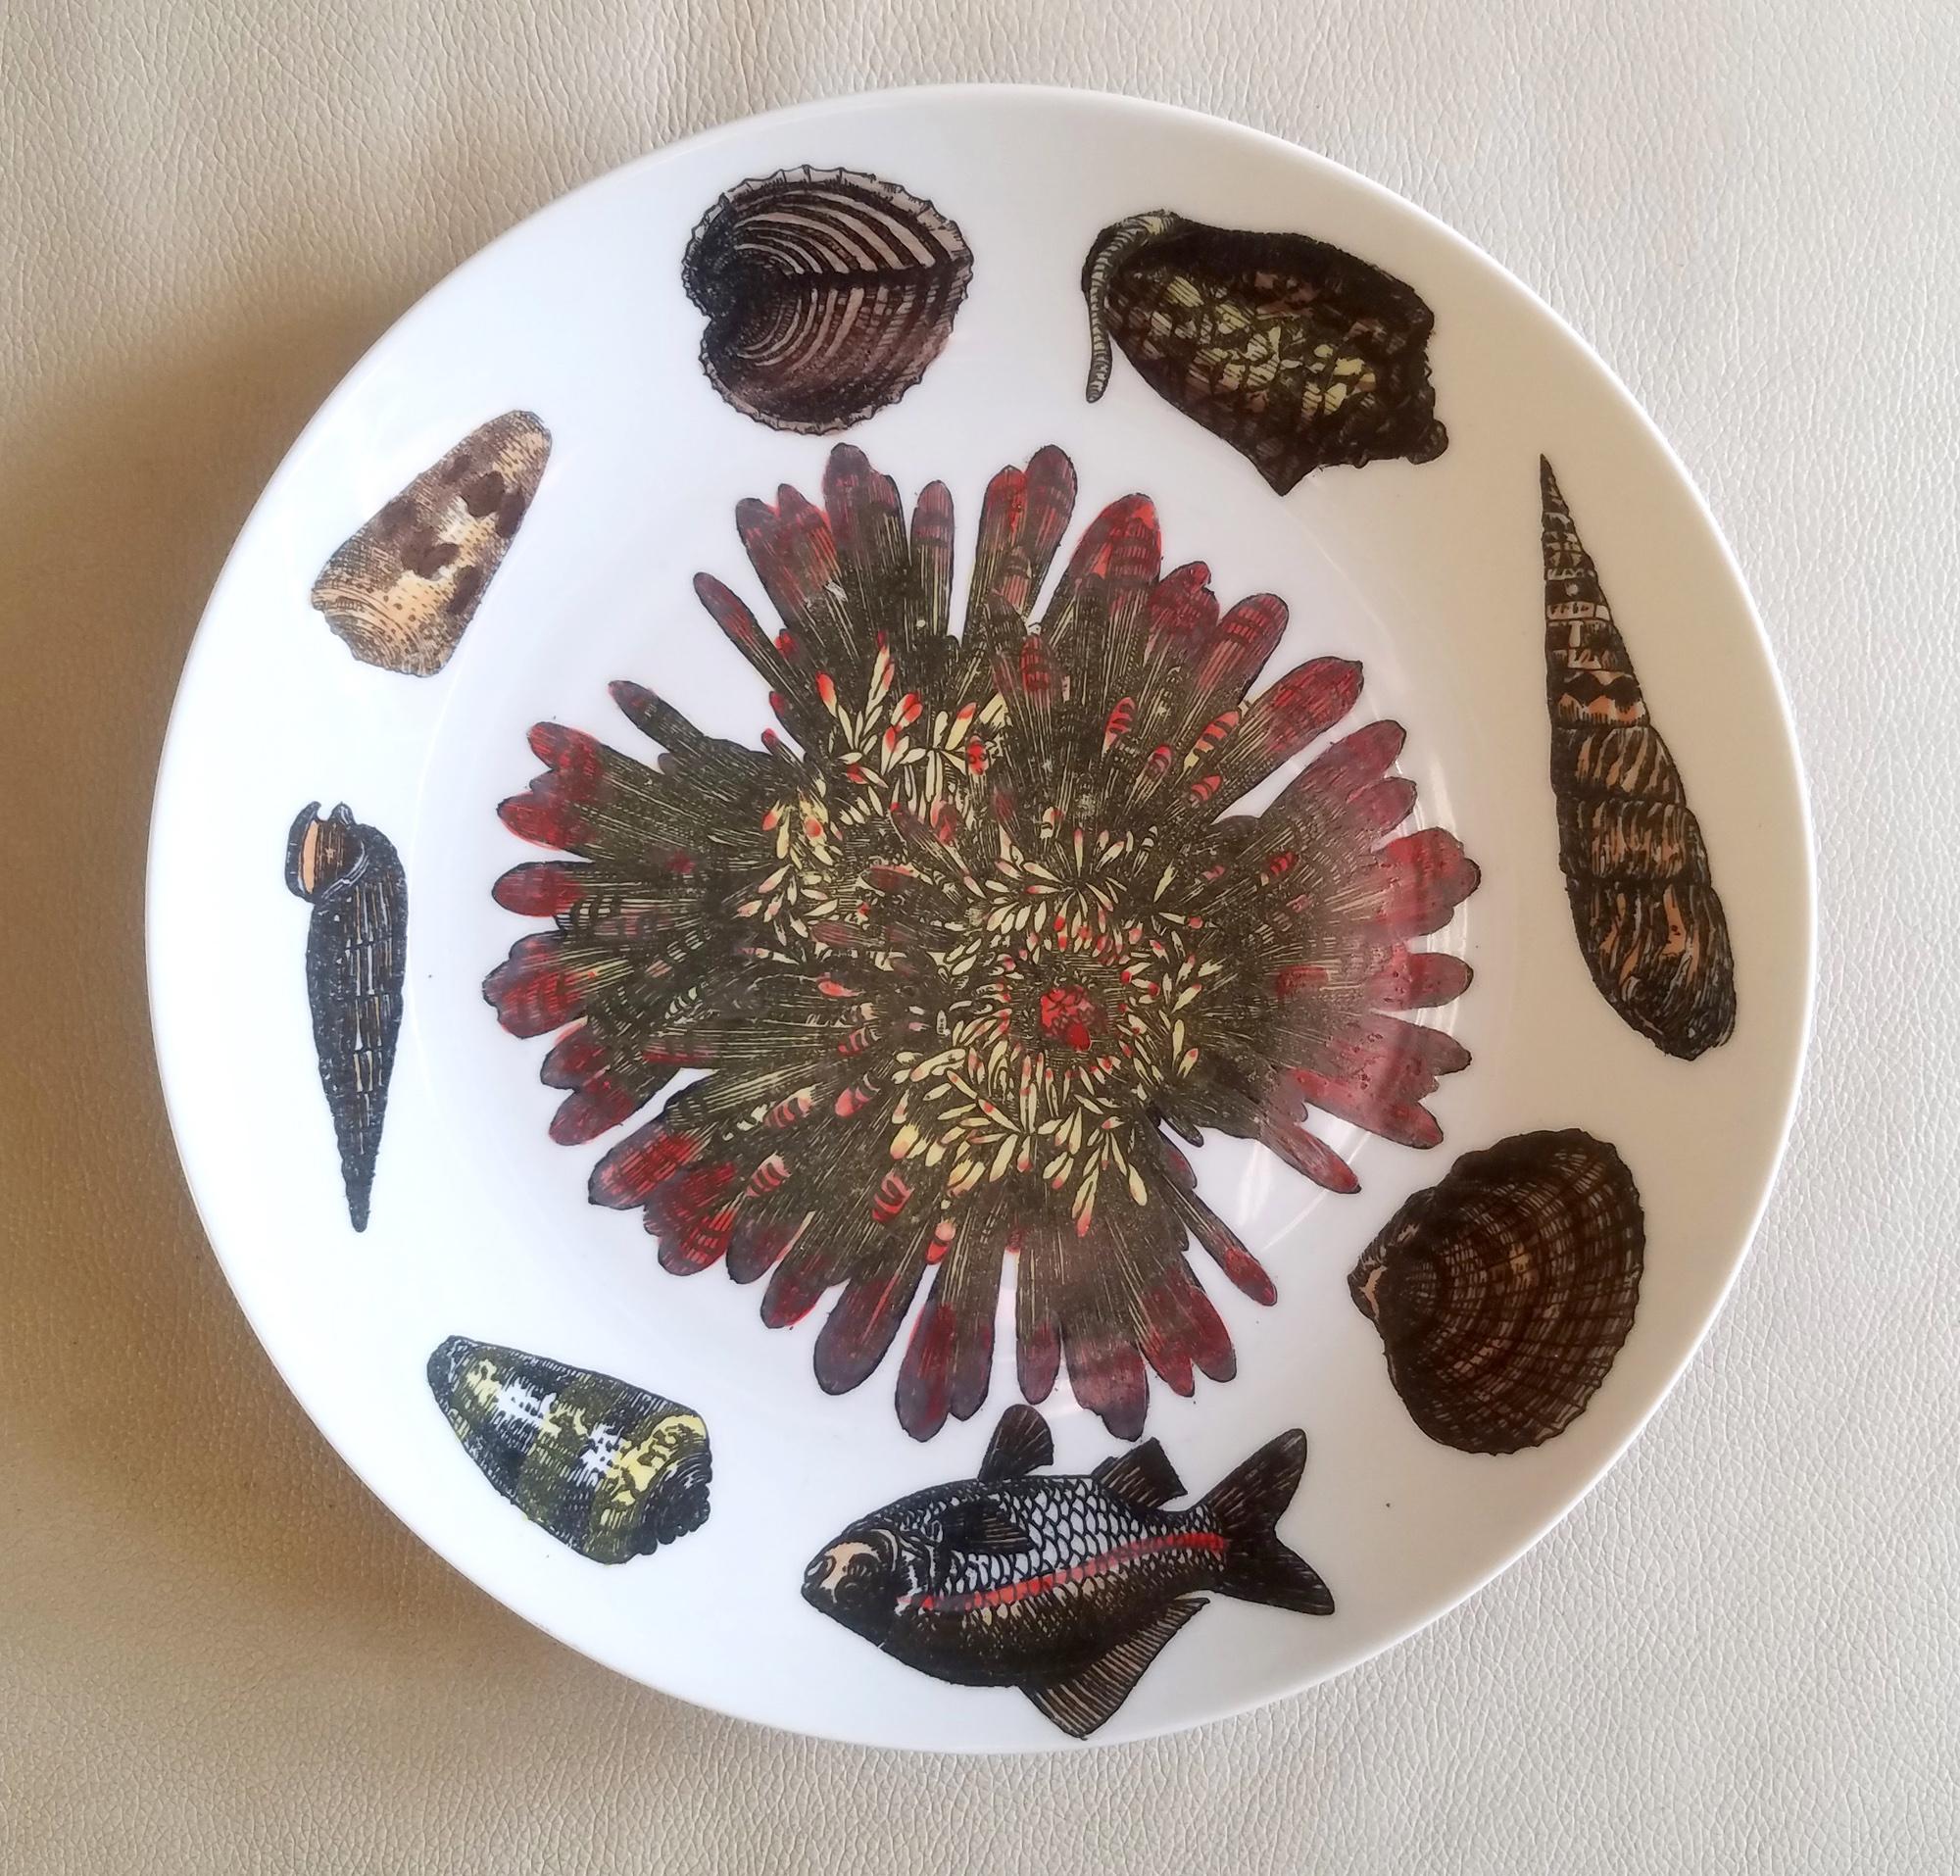 Piero Fornasetti Porcelain Conchiglie Seashell Set of Plates with Mollusks For Sale 8